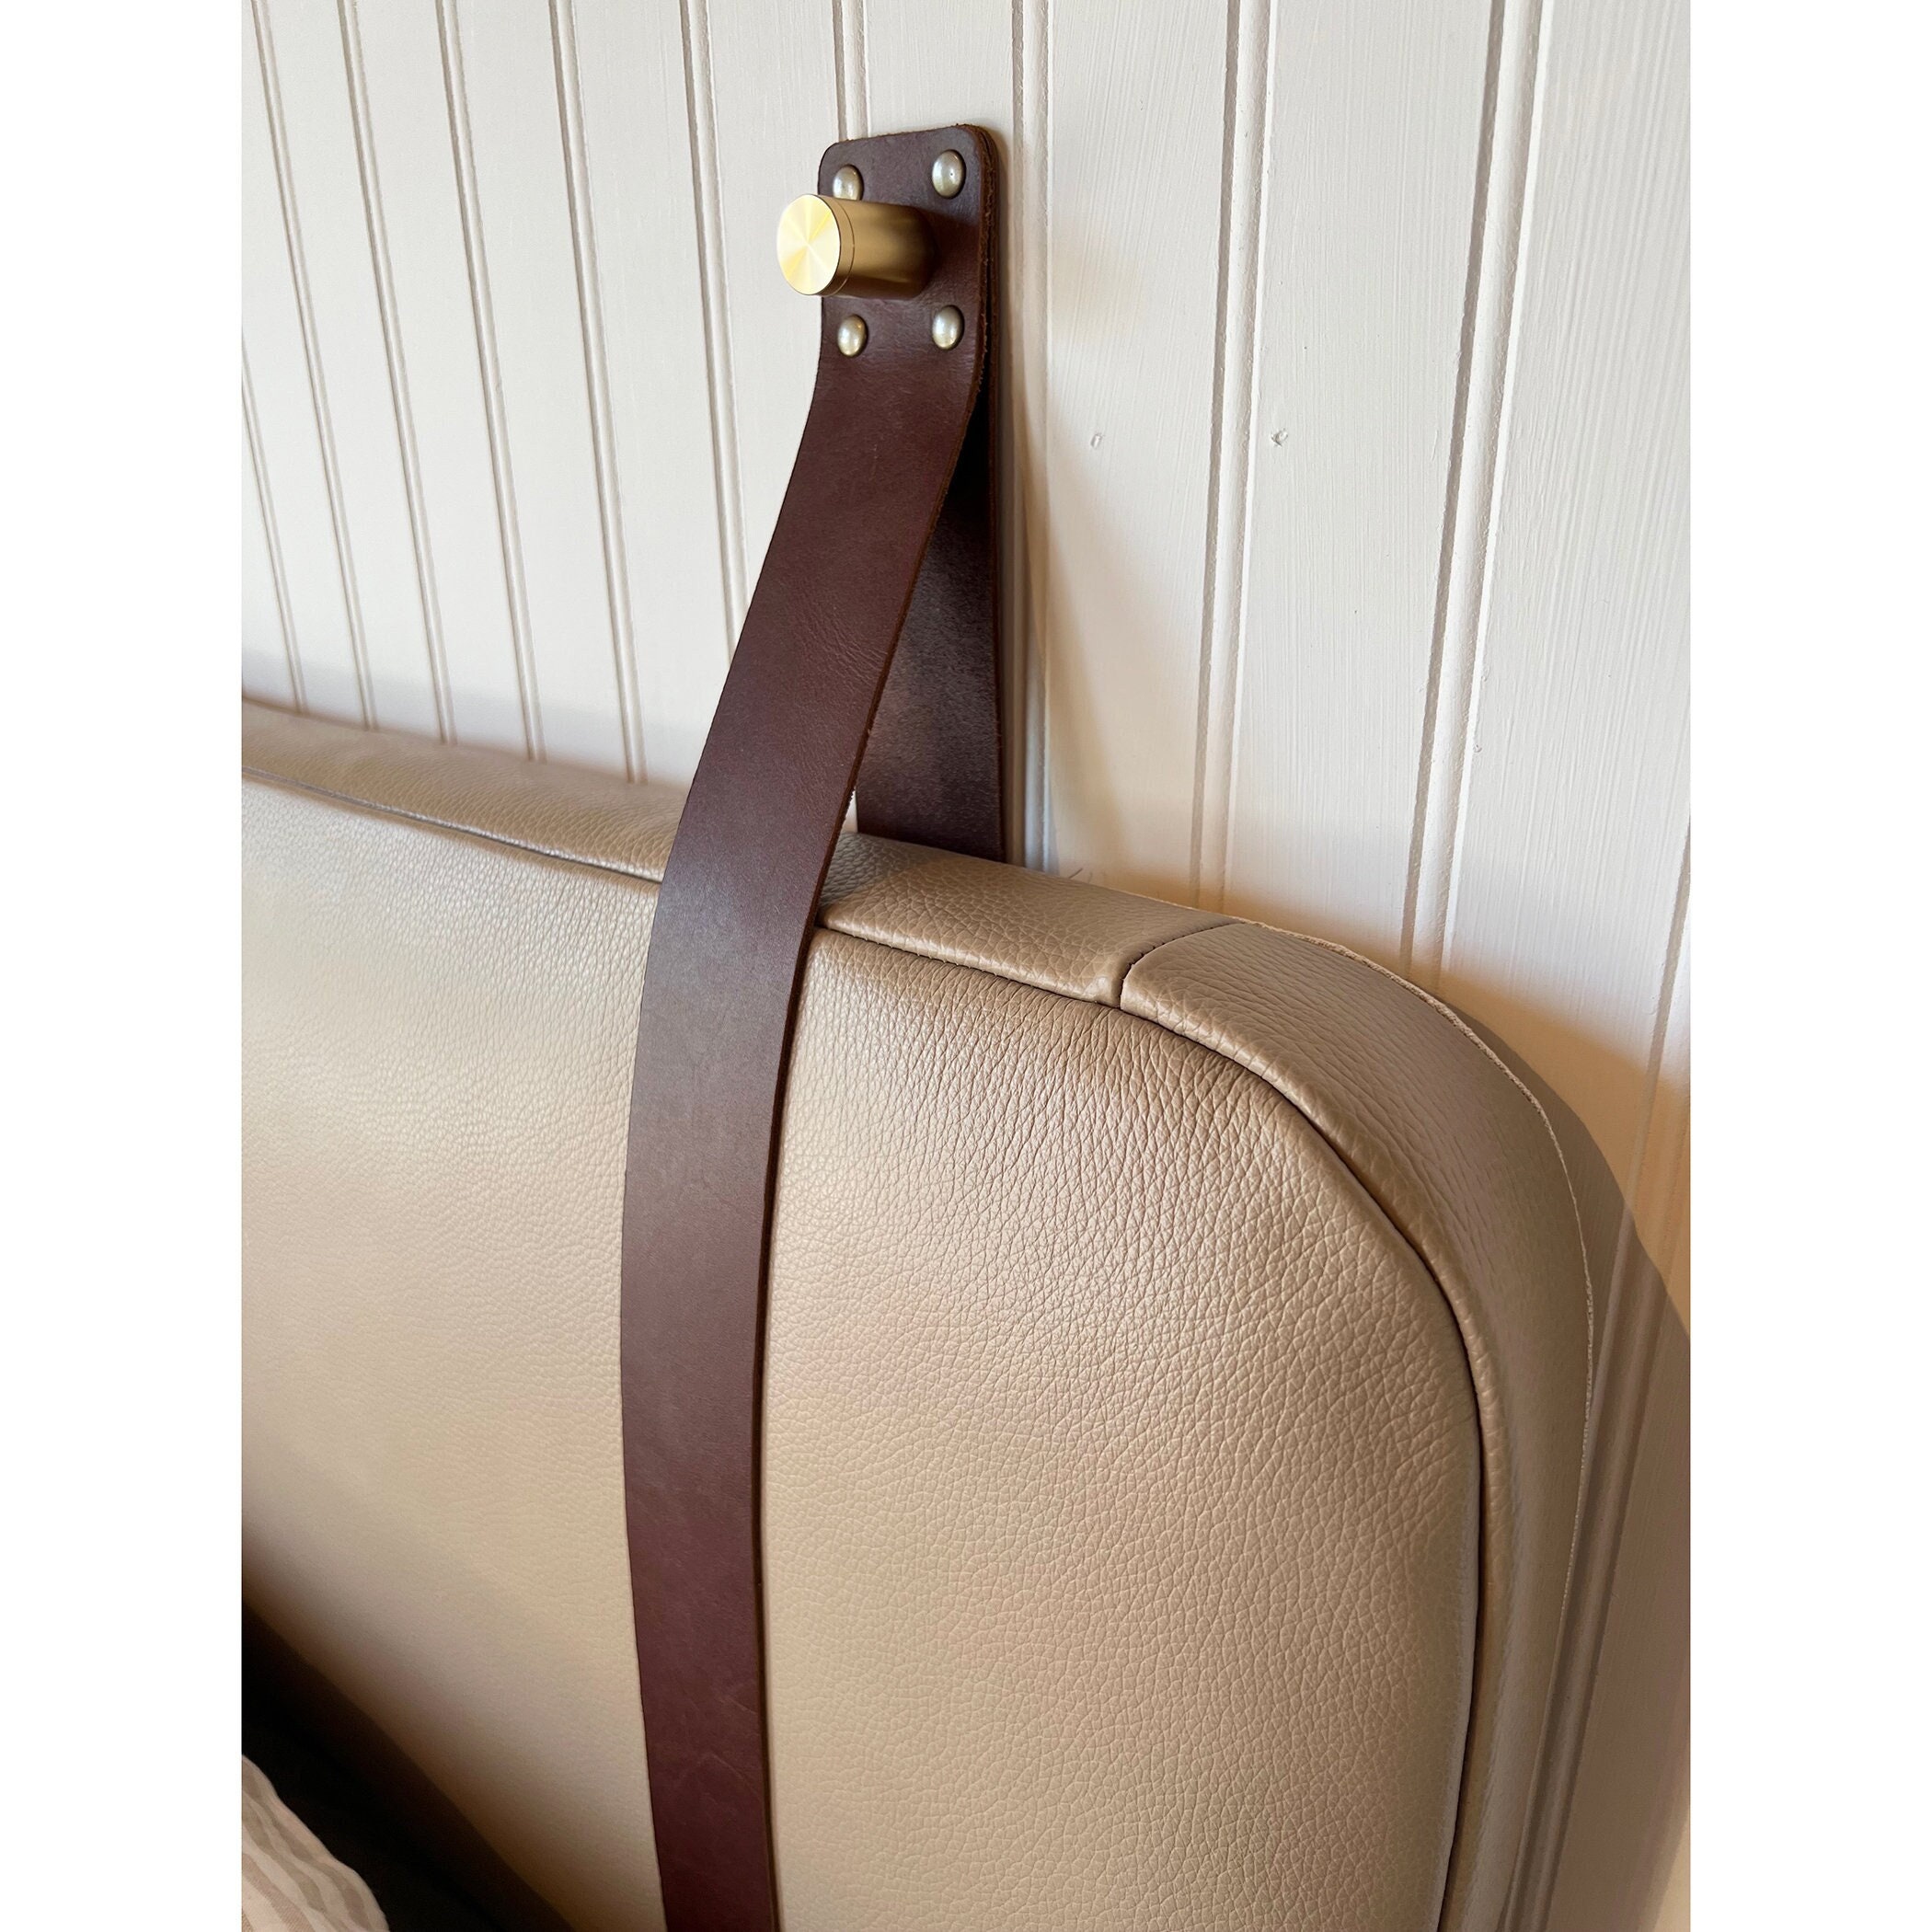 LEATHER STRAP & HARDWARE One, Two or Three Piece Leather Strap Set for  Hanging Cushion Cognac Cow Leather Straps 